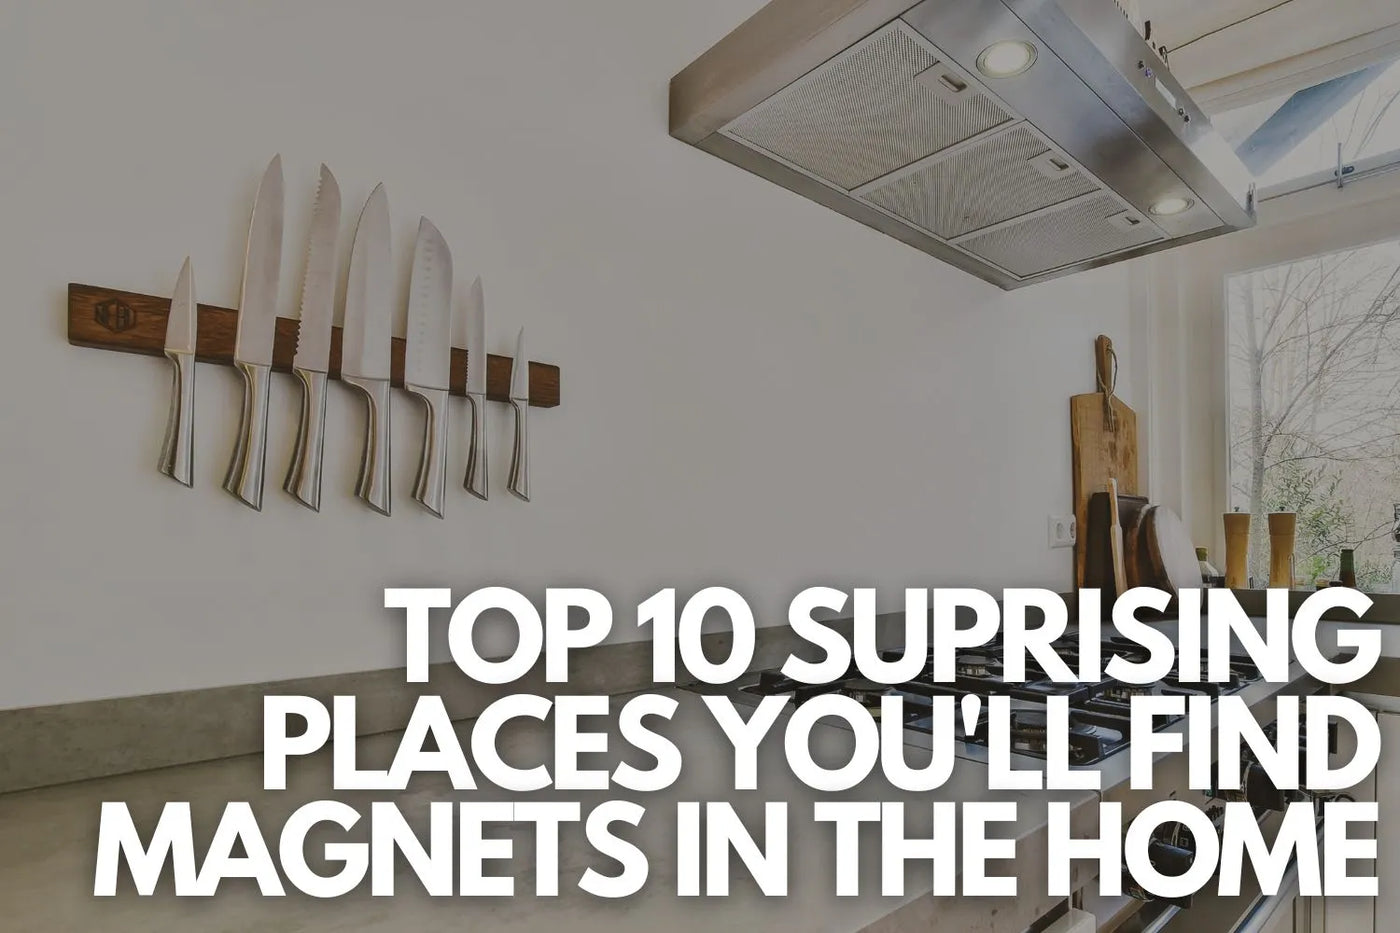 Top 10 Surprising Places You'll Find Magnets in the Home